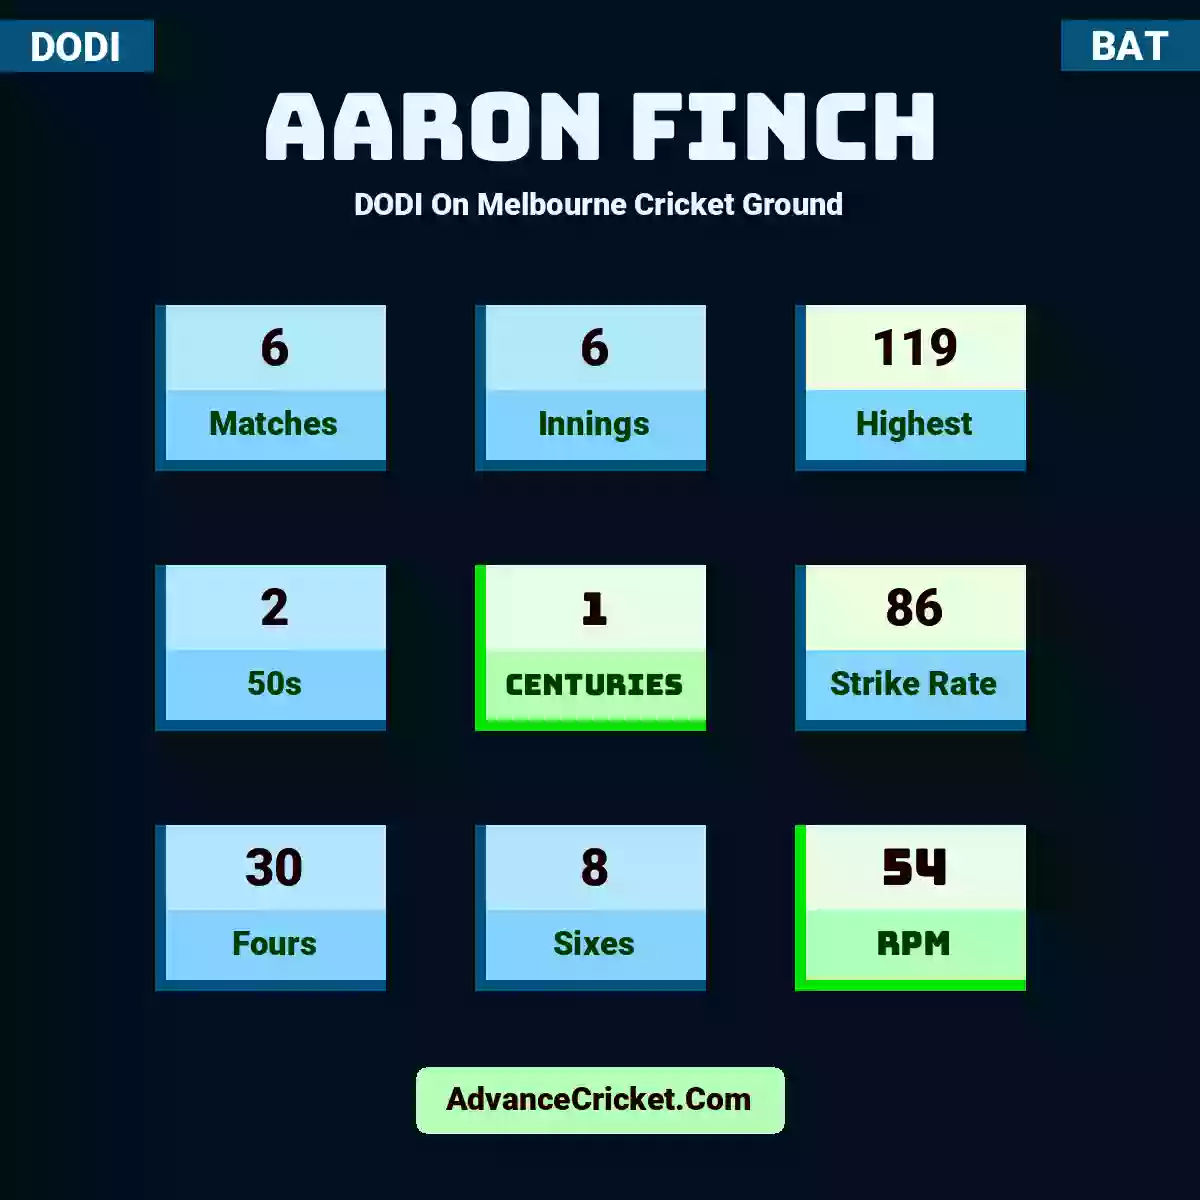 Aaron Finch DODI  On Melbourne Cricket Ground, Aaron Finch played 6 matches, scored 119 runs as highest, 2 half-centuries, and 1 centuries, with a strike rate of 86. A.Finch hit 30 fours and 8 sixes, with an RPM of 54.